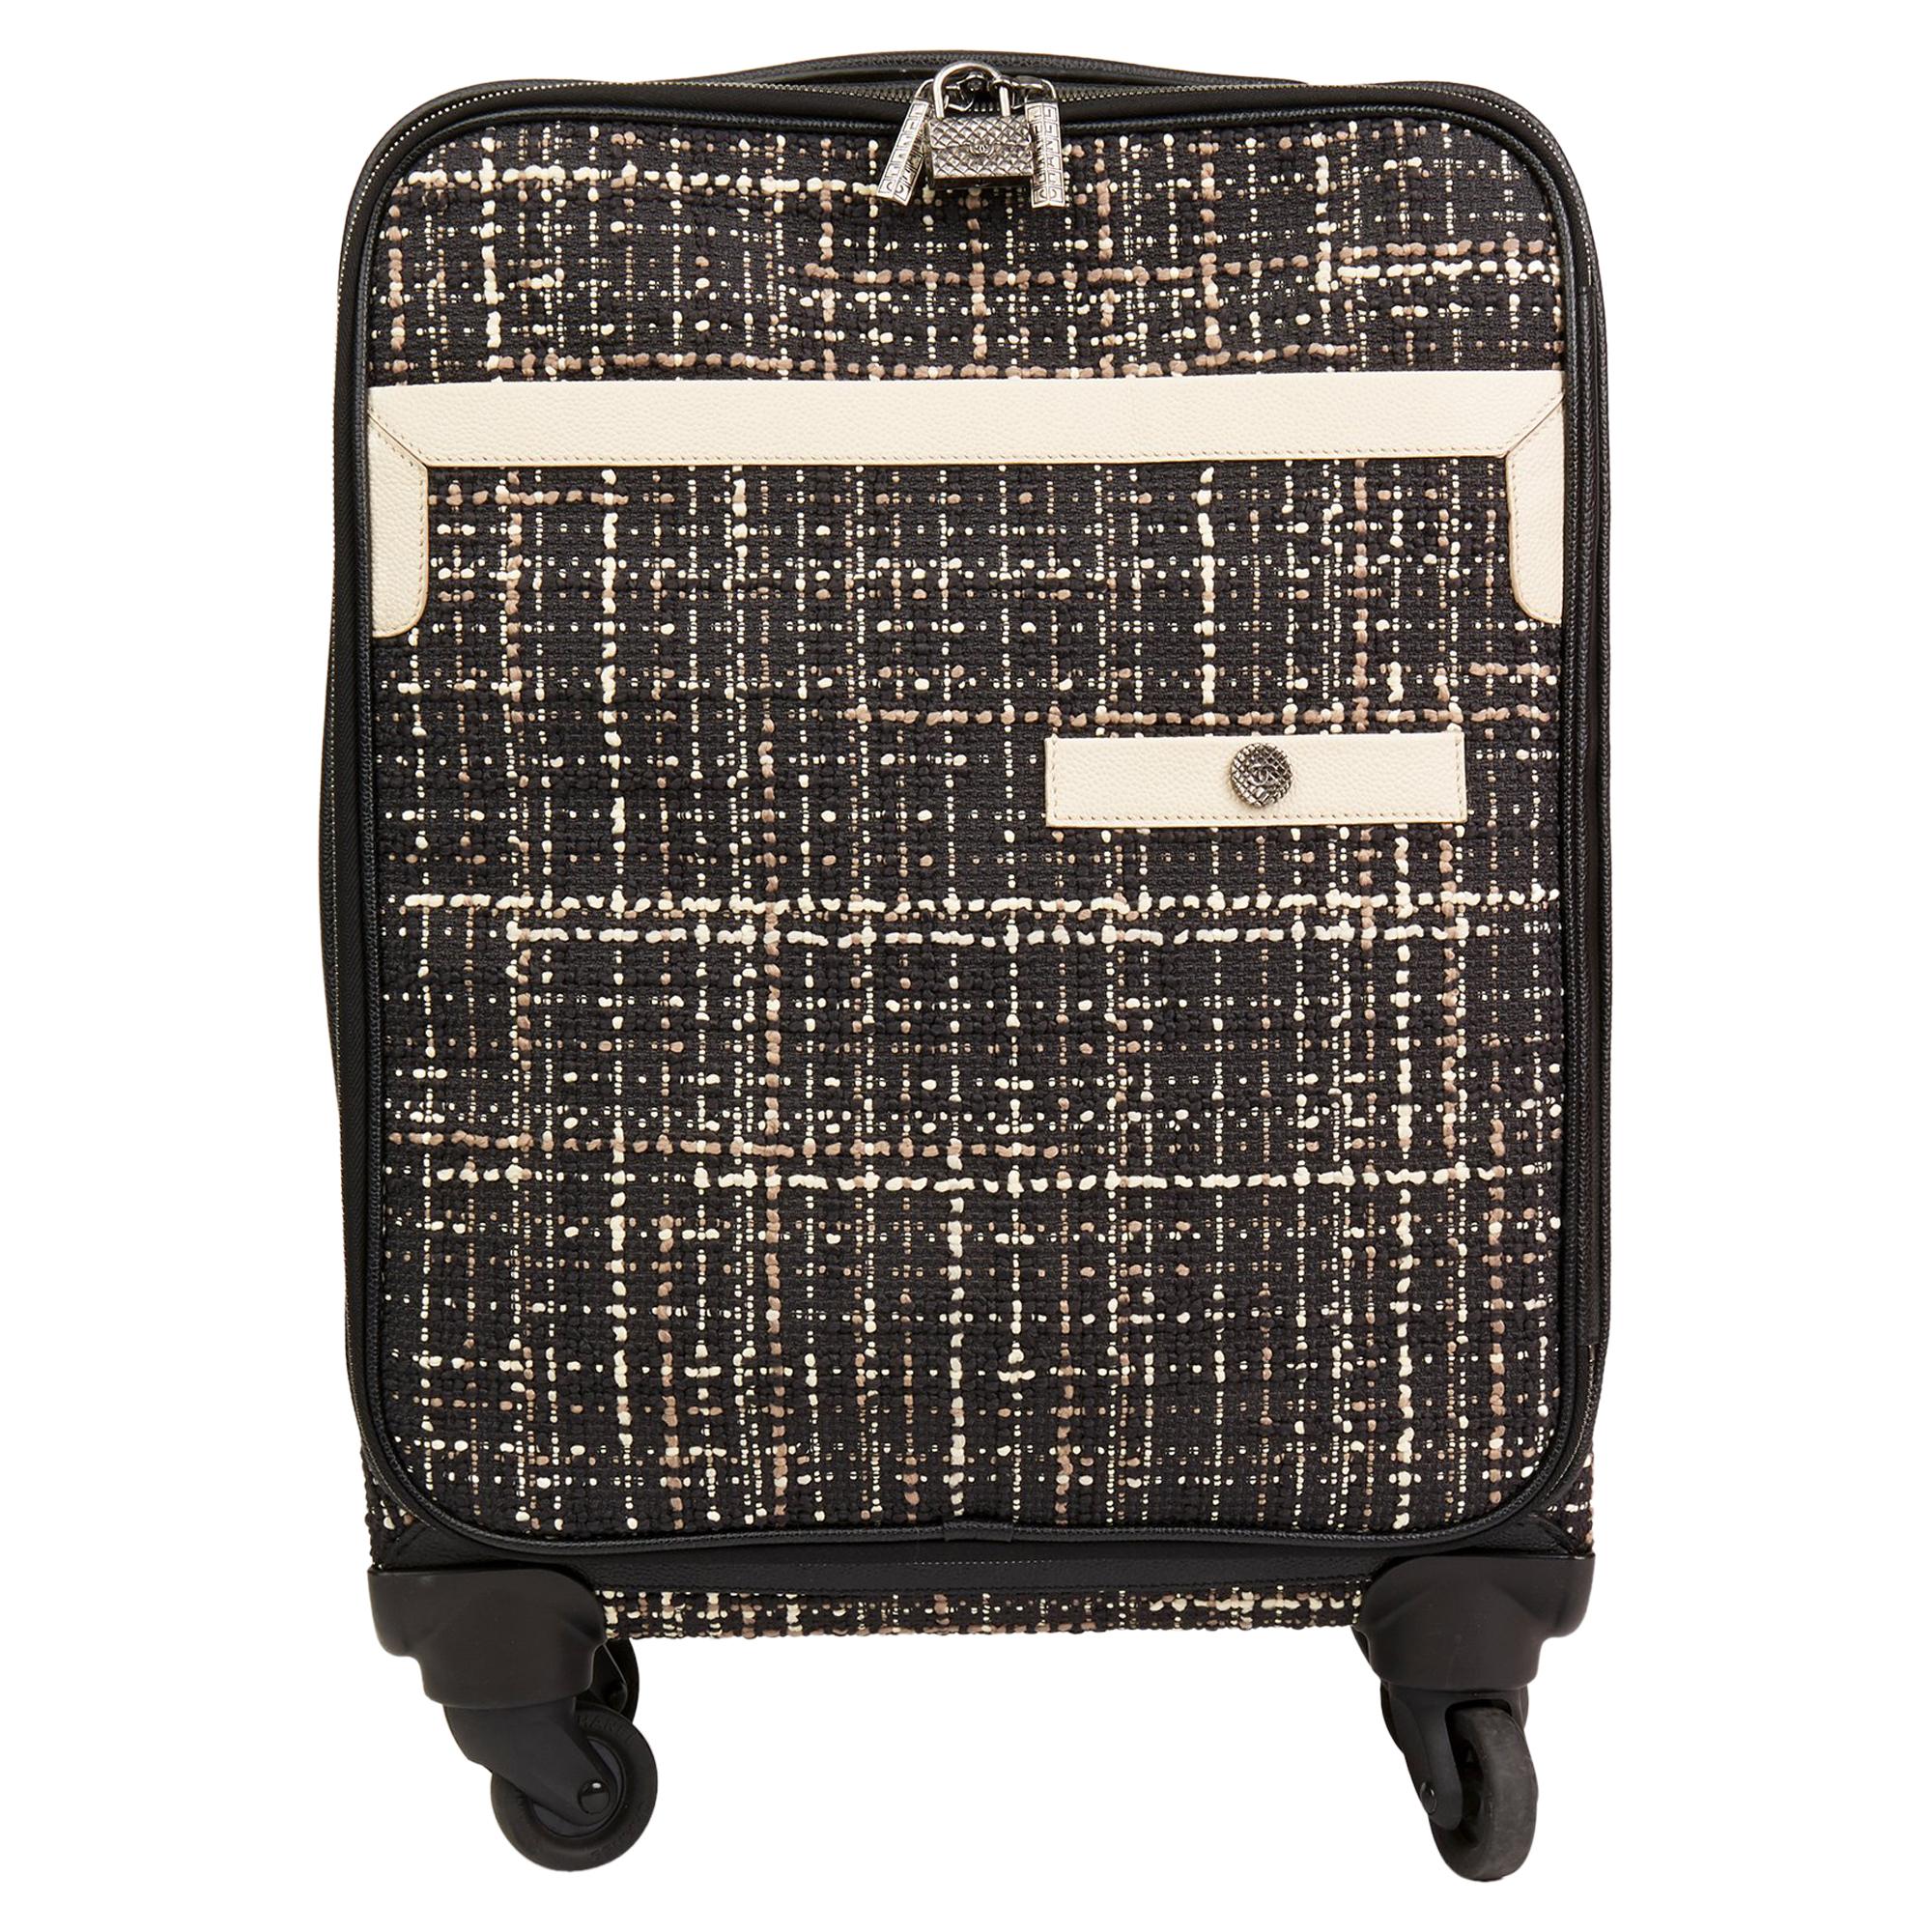 2016 Chanel Black Tweed & Caviar Leather Jacket Trolley Rolling Suitcase